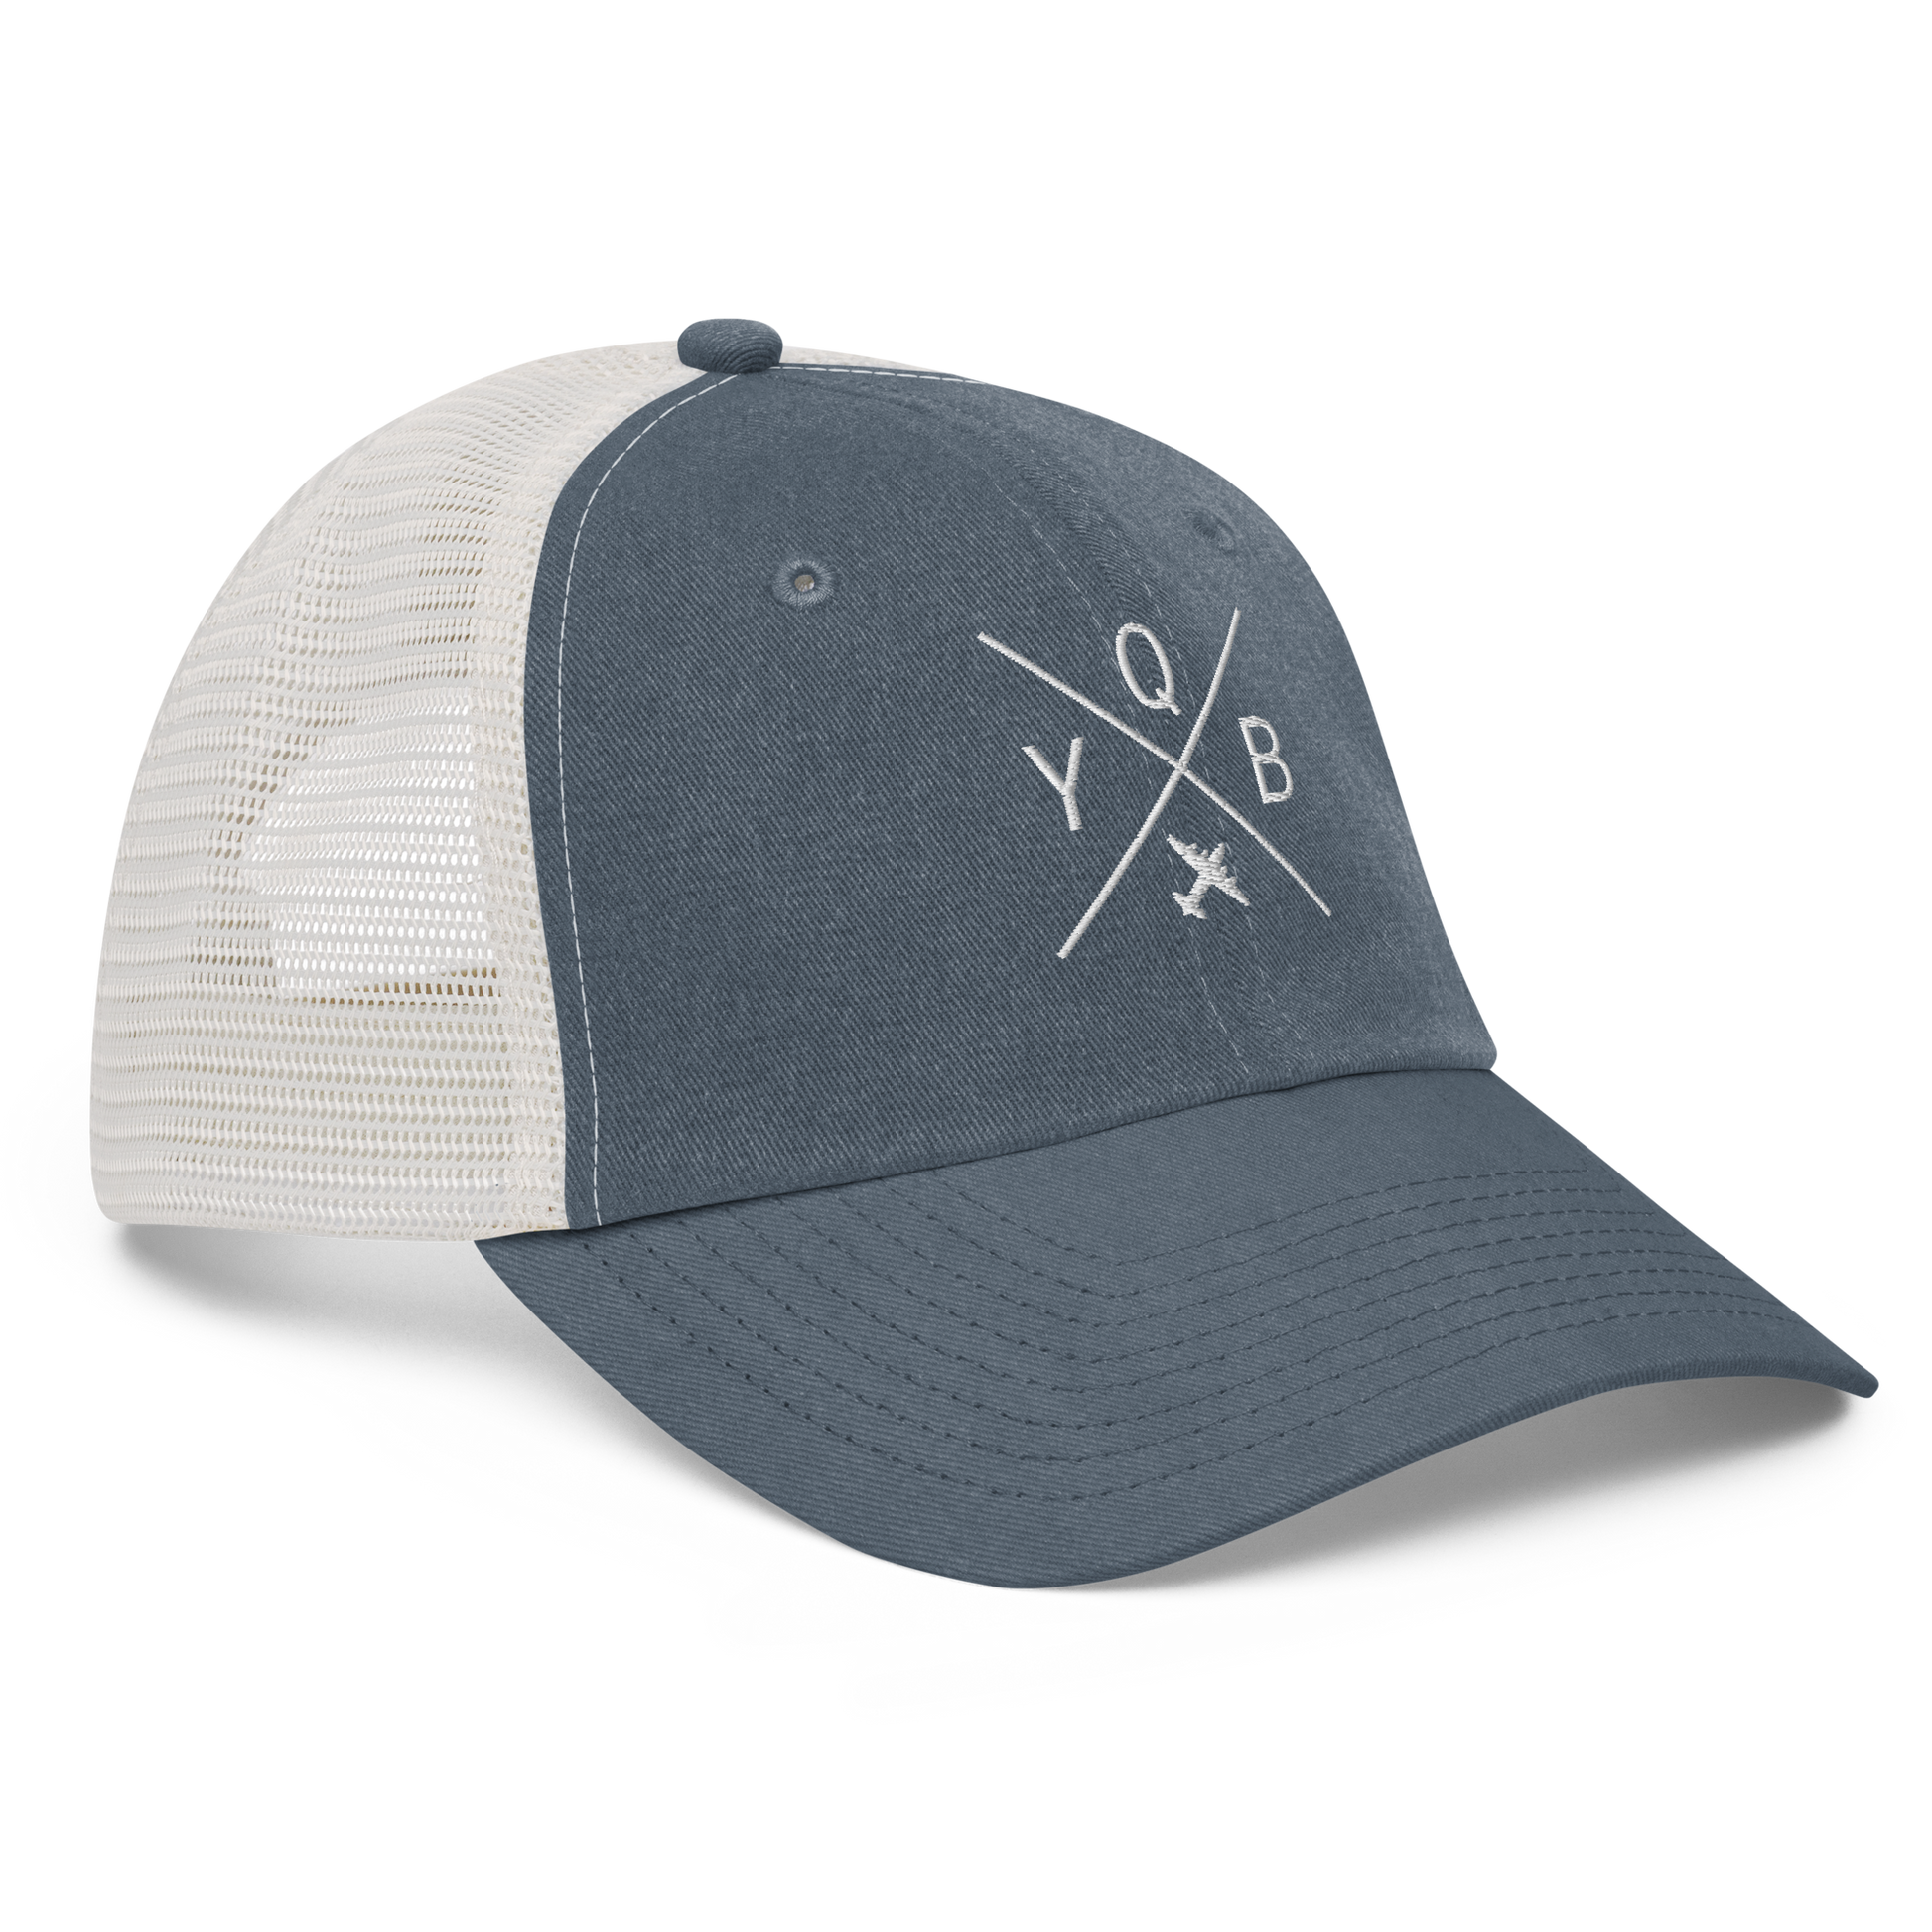 Crossed-X Pigment-Dyed Trucker Cap • YQB Quebec City • YHM Designs - Image 07